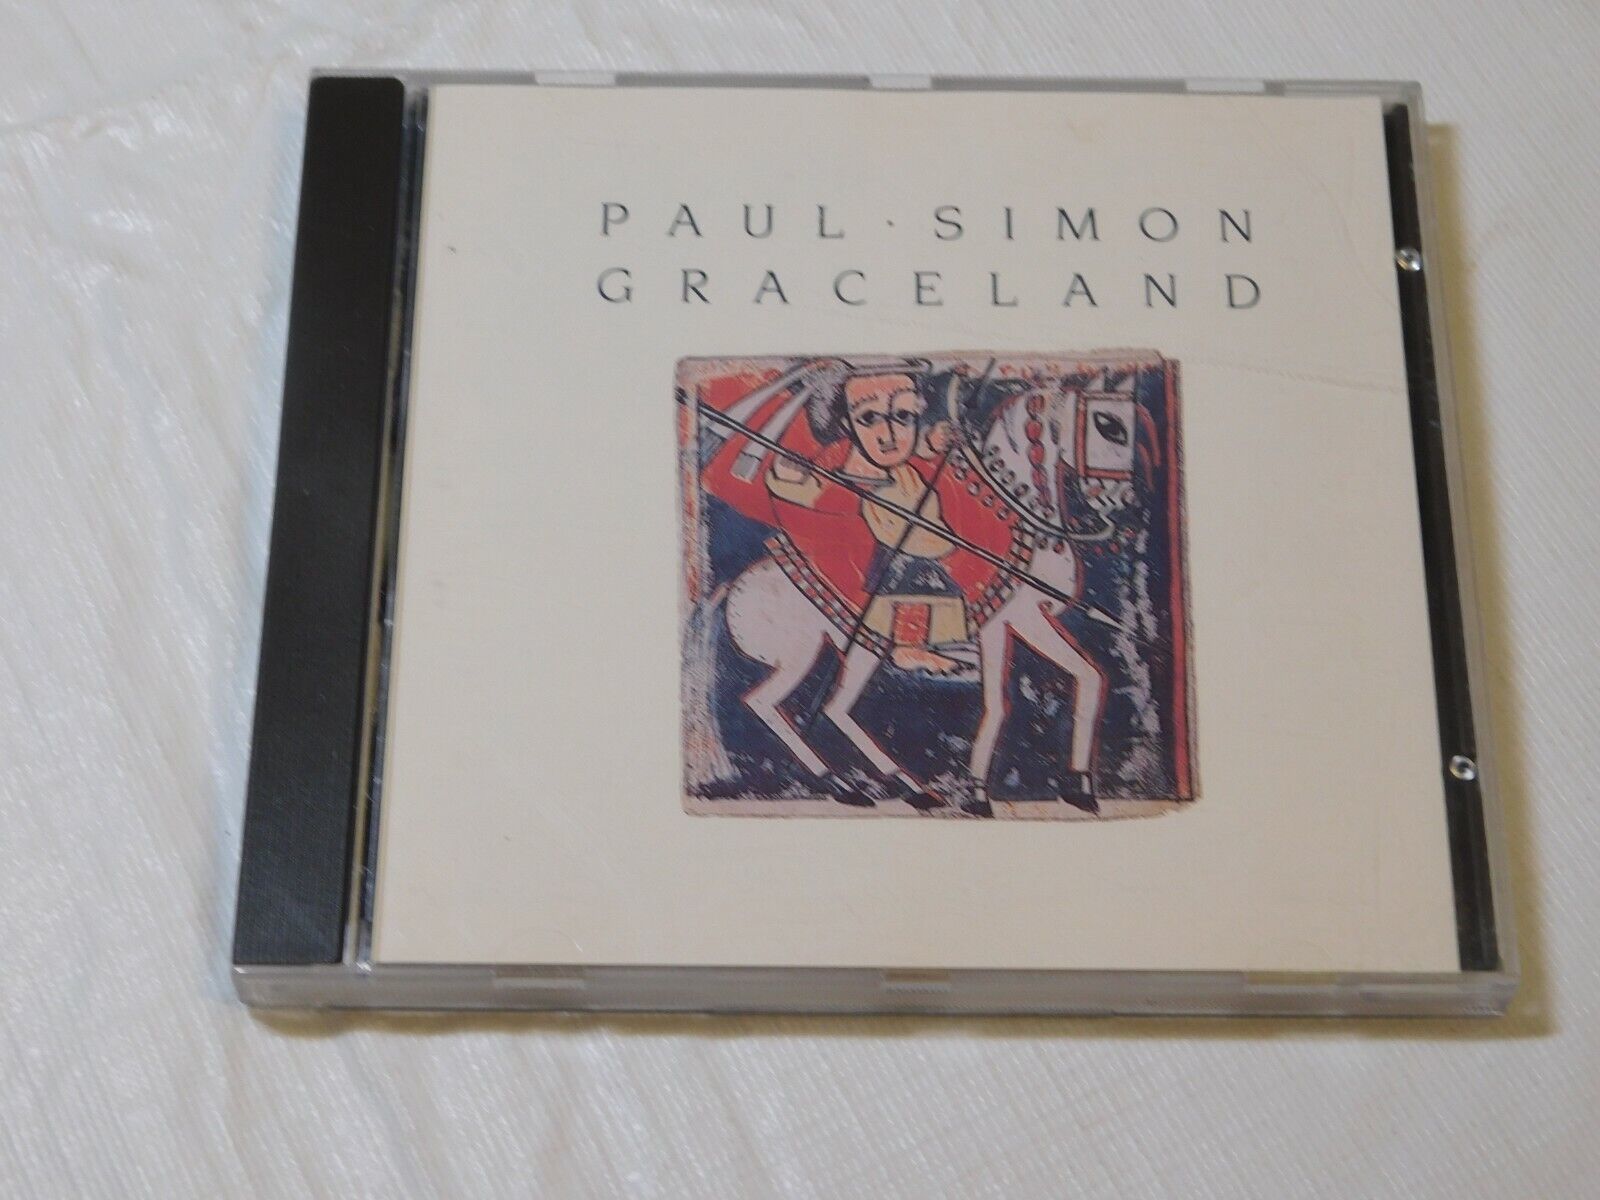 Primary image for Graceland by Paul Simon (CD, Sep-1986, Warner Bros. Records) You Can Call Me Al